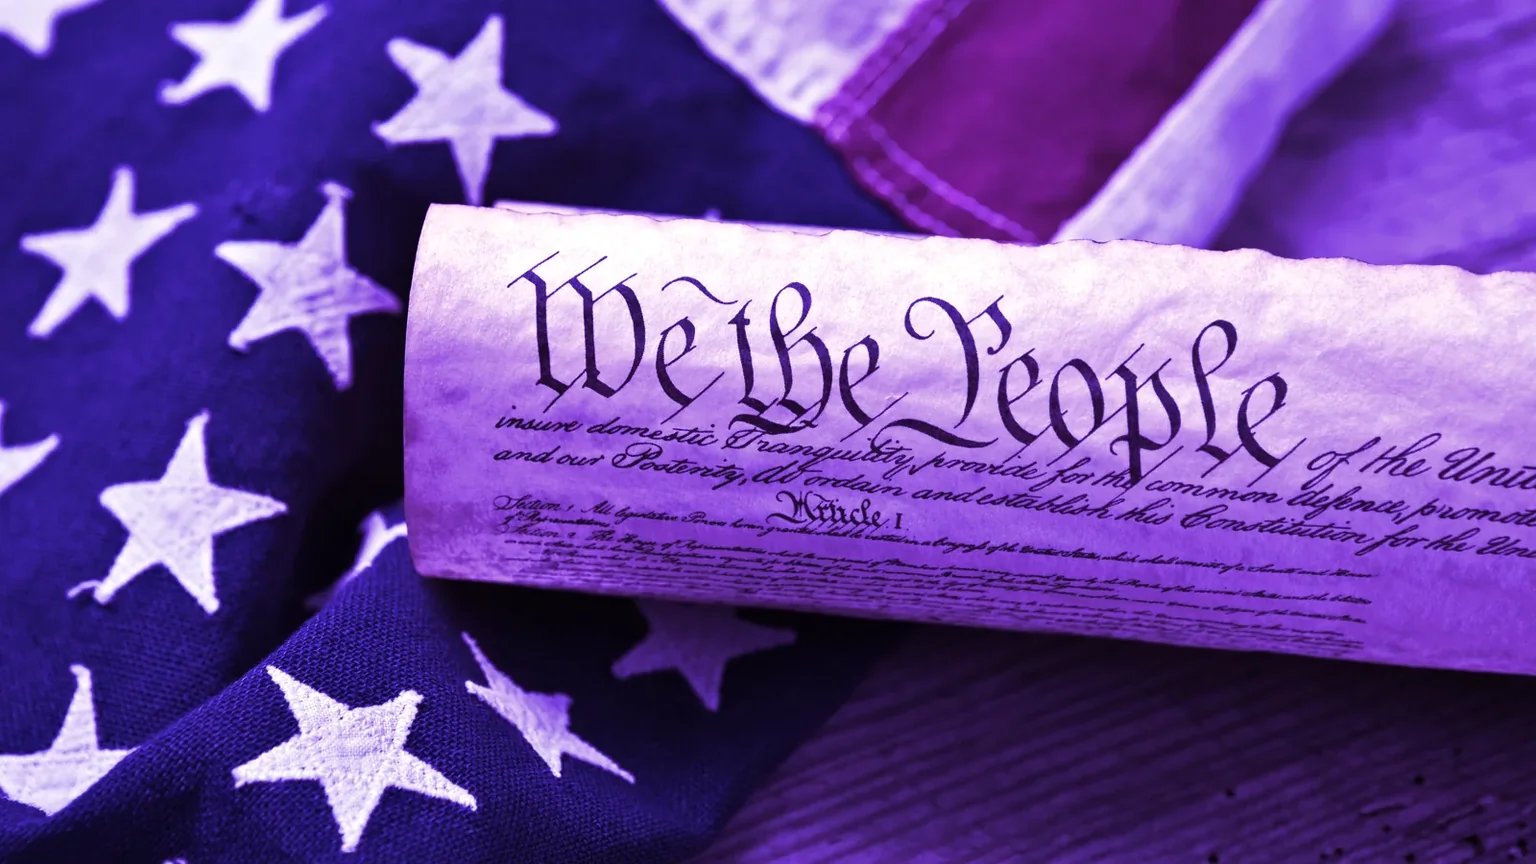 United States Constitution, rolled in a scroll on a vintage American flag and rustic wooden board. Image: Shutterstock